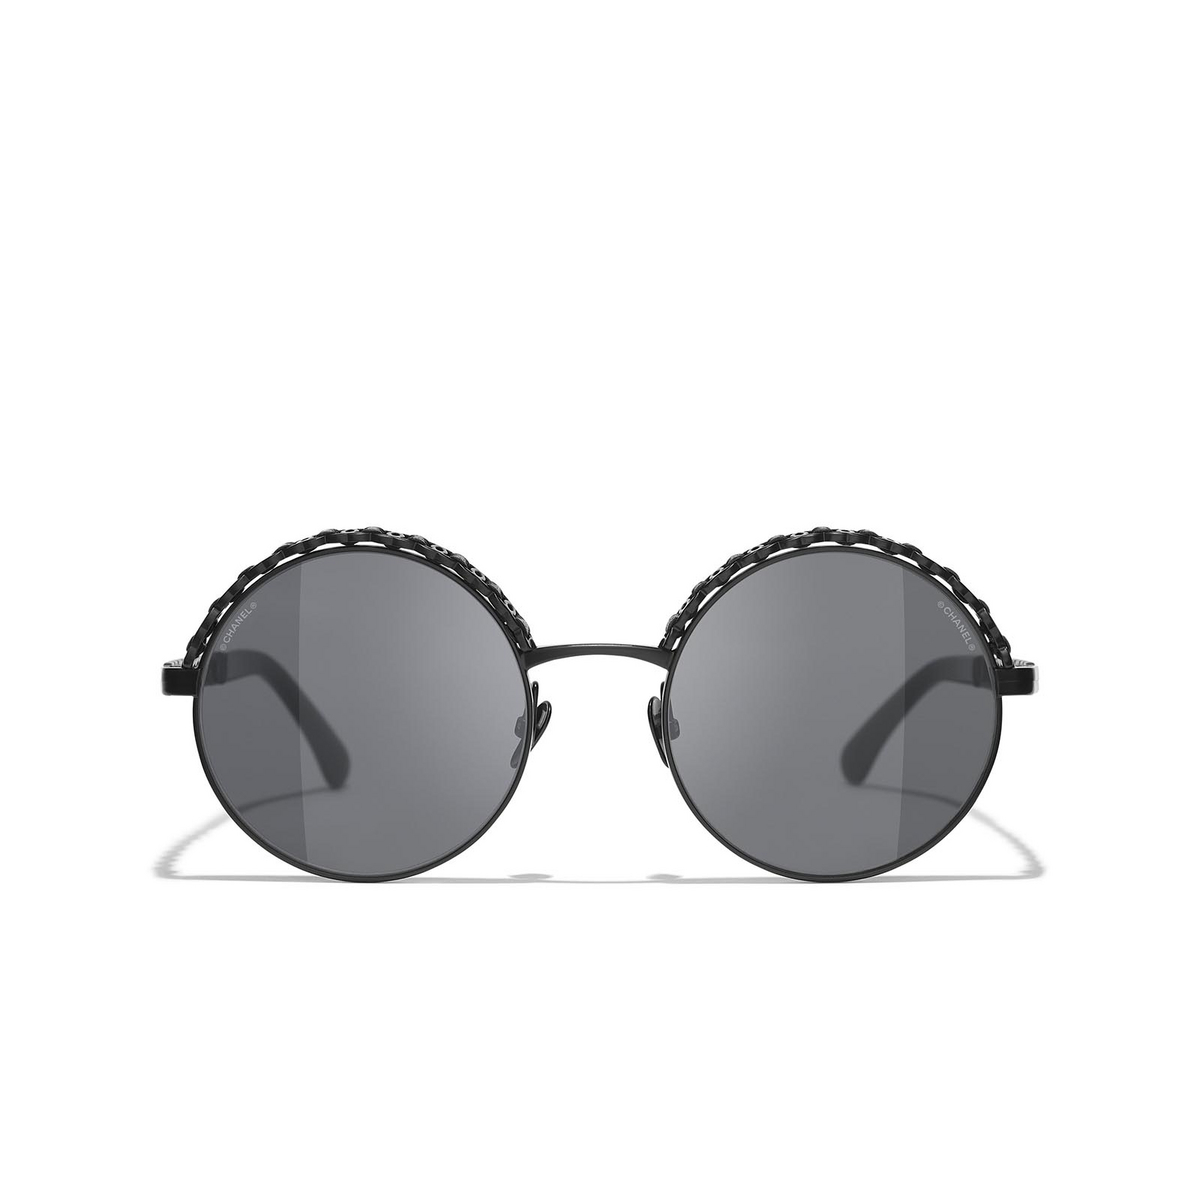 CHANEL round Sunglasses C101S4 Black - front view